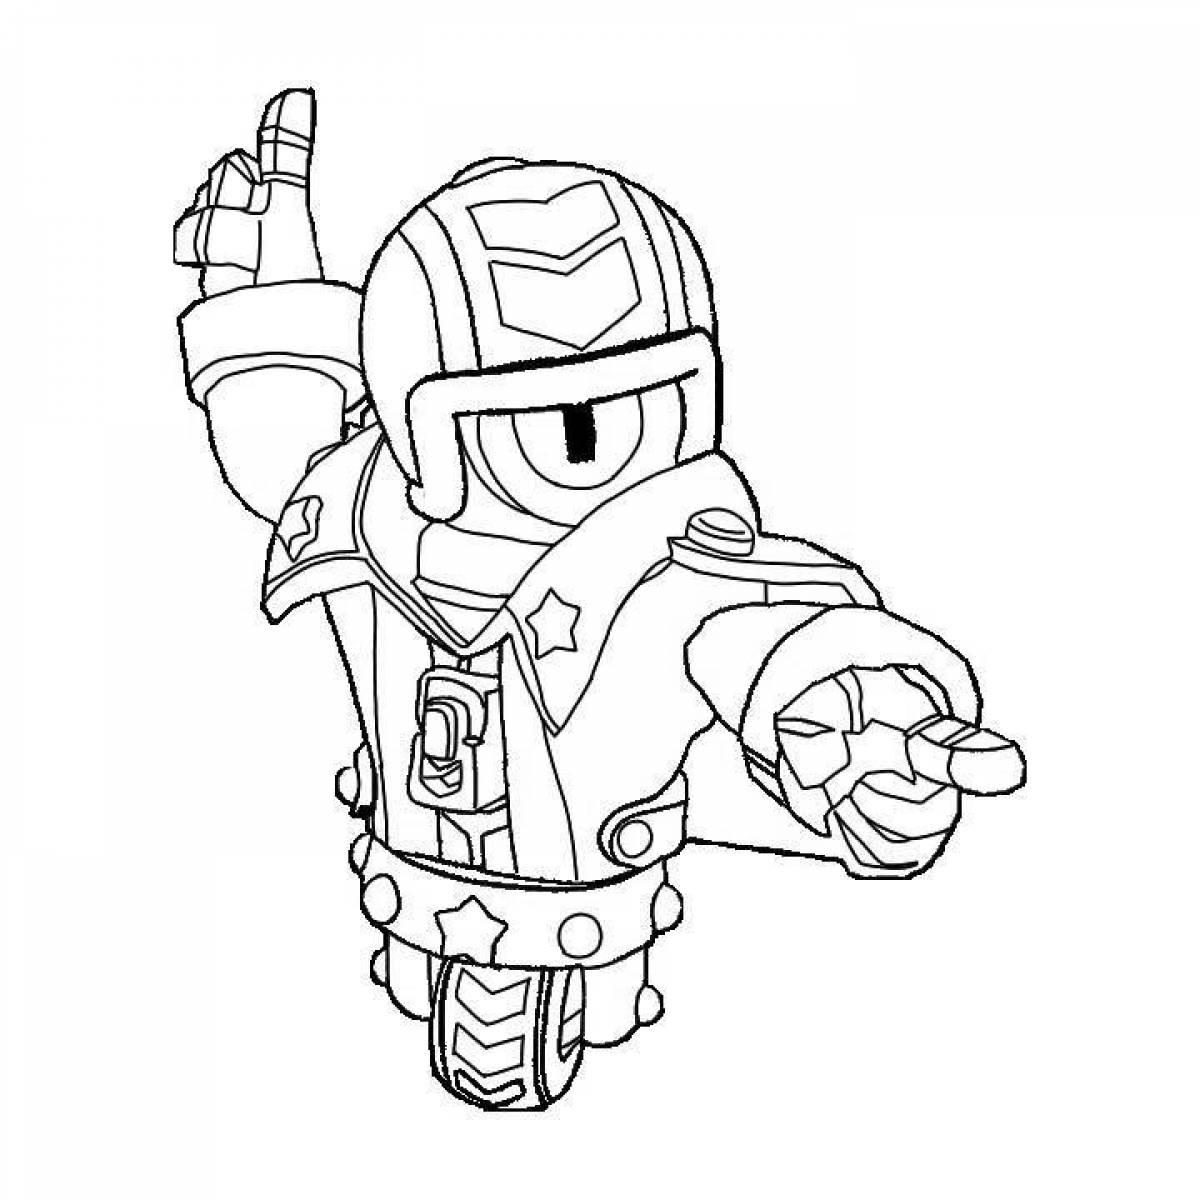 Large brawl stars buzz coloring page